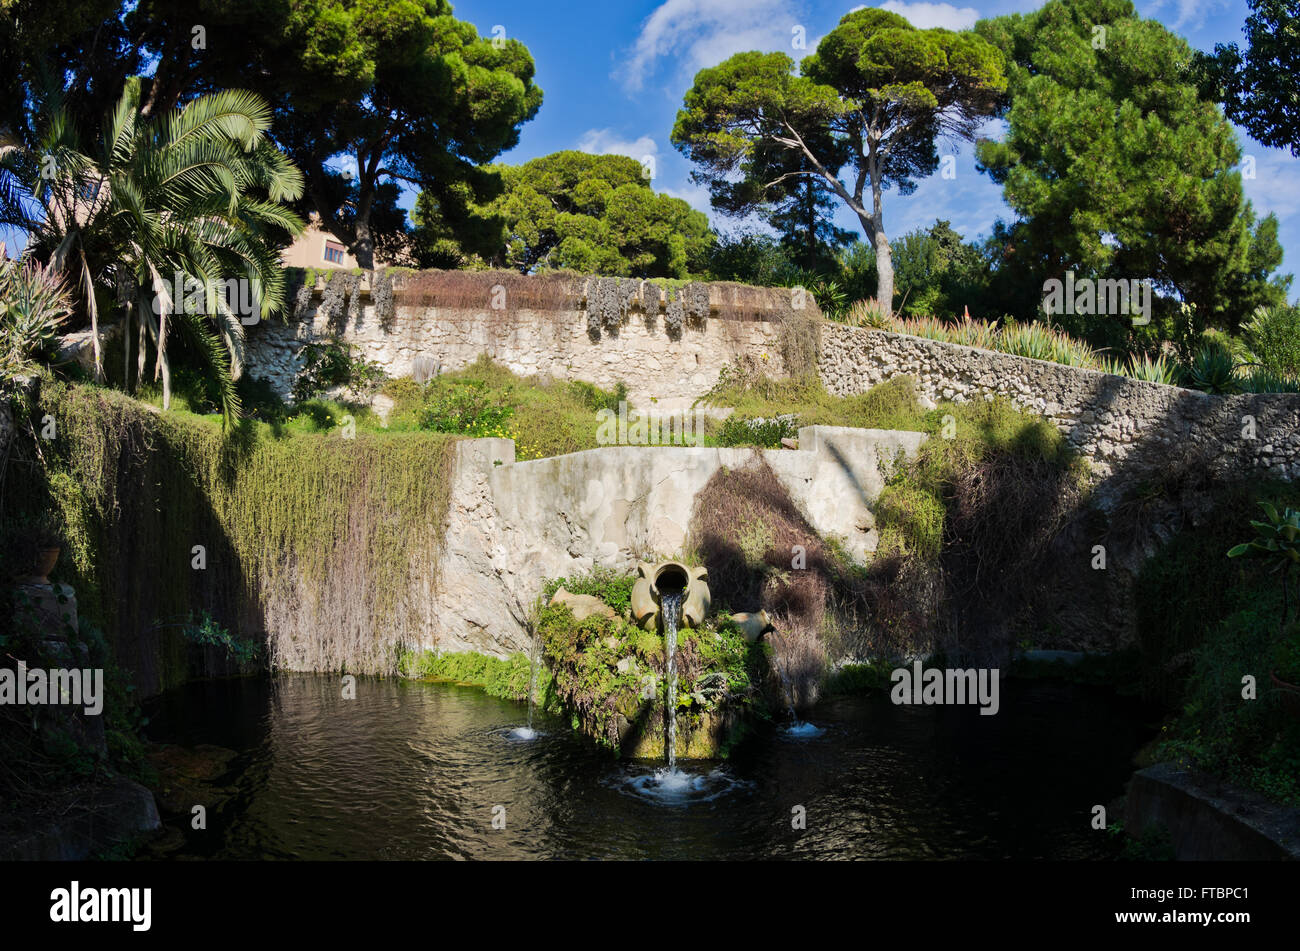 Fountain in a park with water flowing from an old amphora, Cagliari, Sardinia Stock Photo